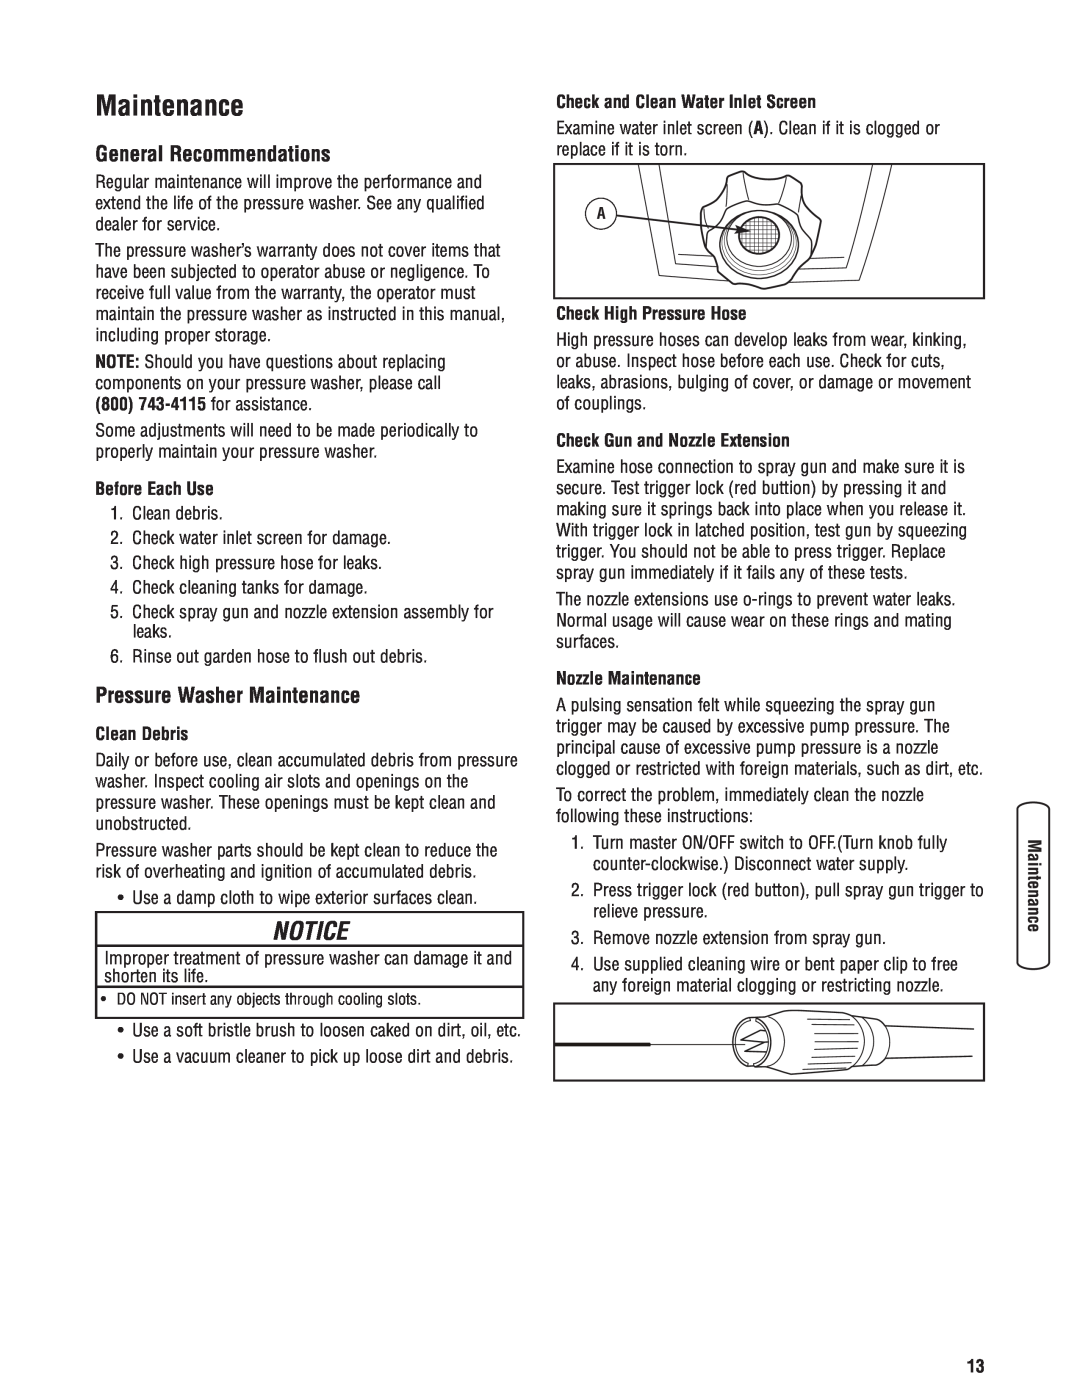 Briggs & Stratton Electric Pressure Washer manual General Recommendations, Pressure Washer Maintenance, Before Each Use 